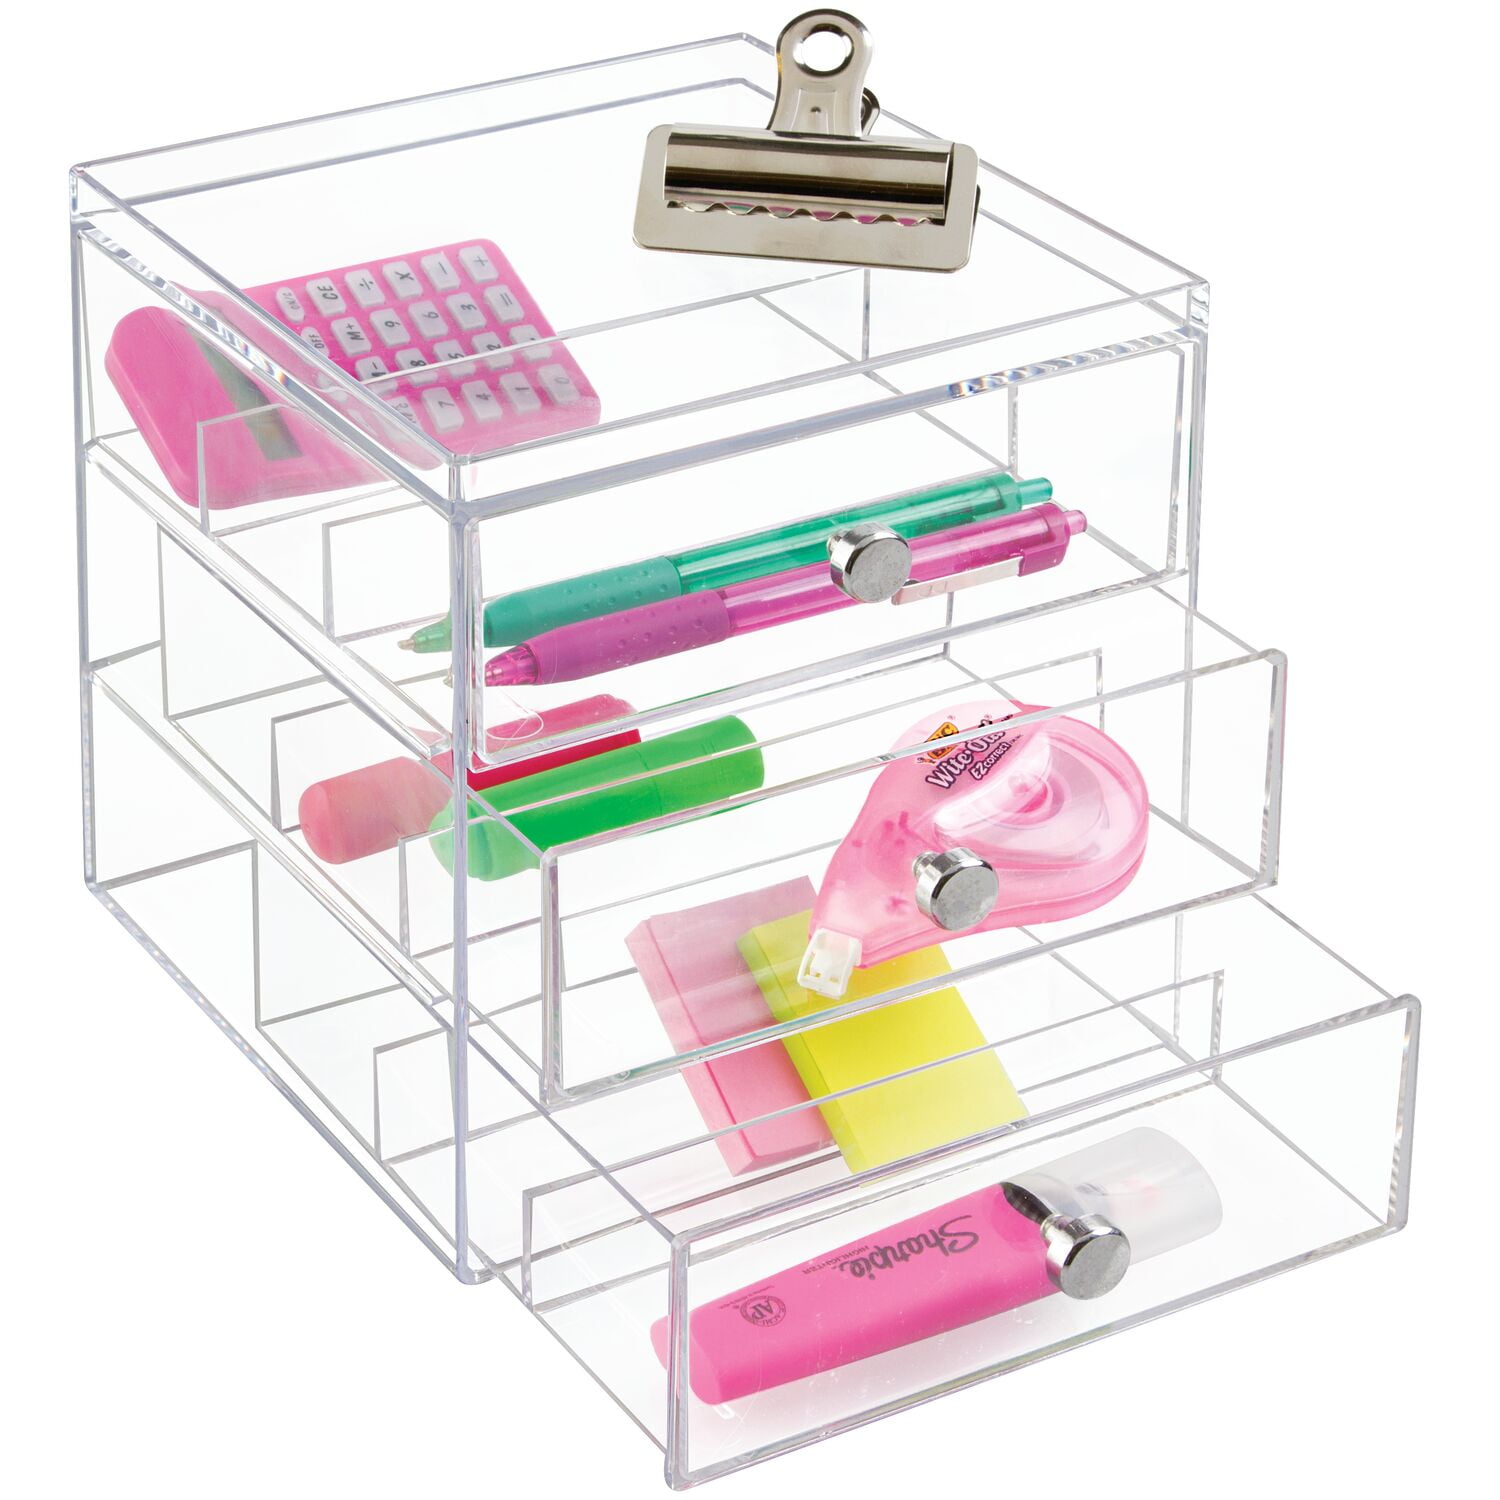 iDesign Clarity Clear Divided Tray Organizer